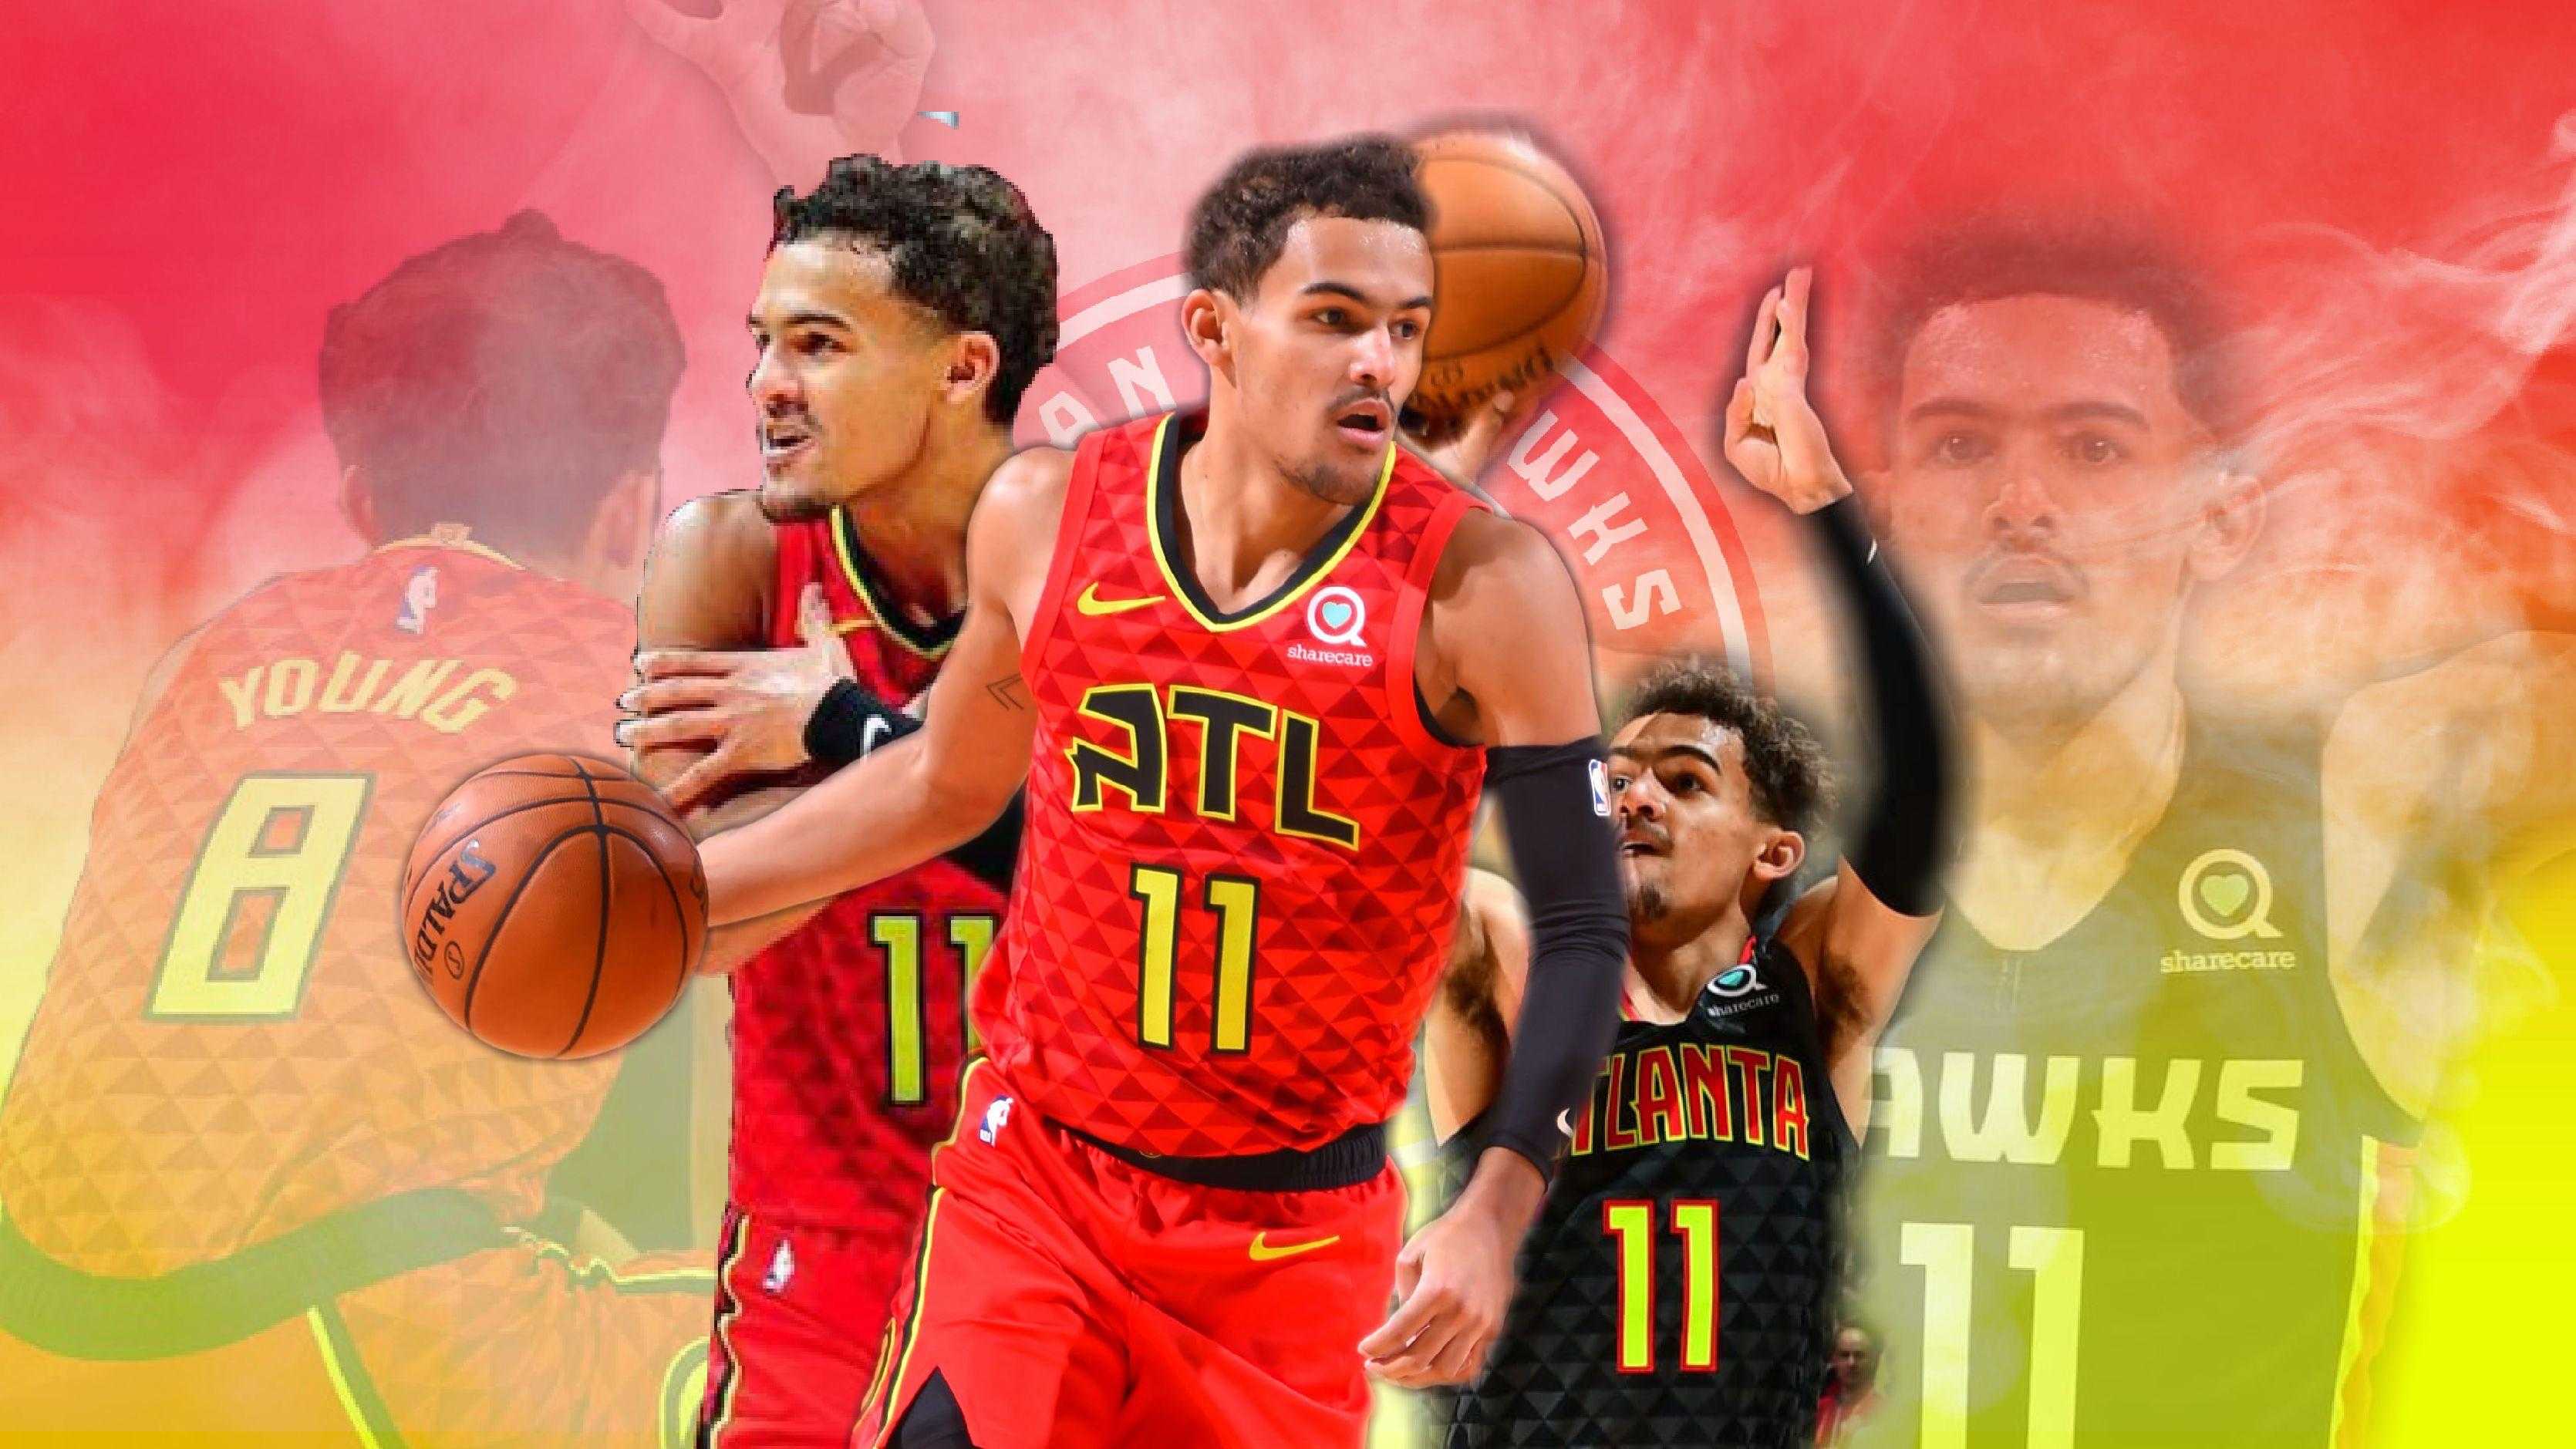 Trae Young Wallpaper 1